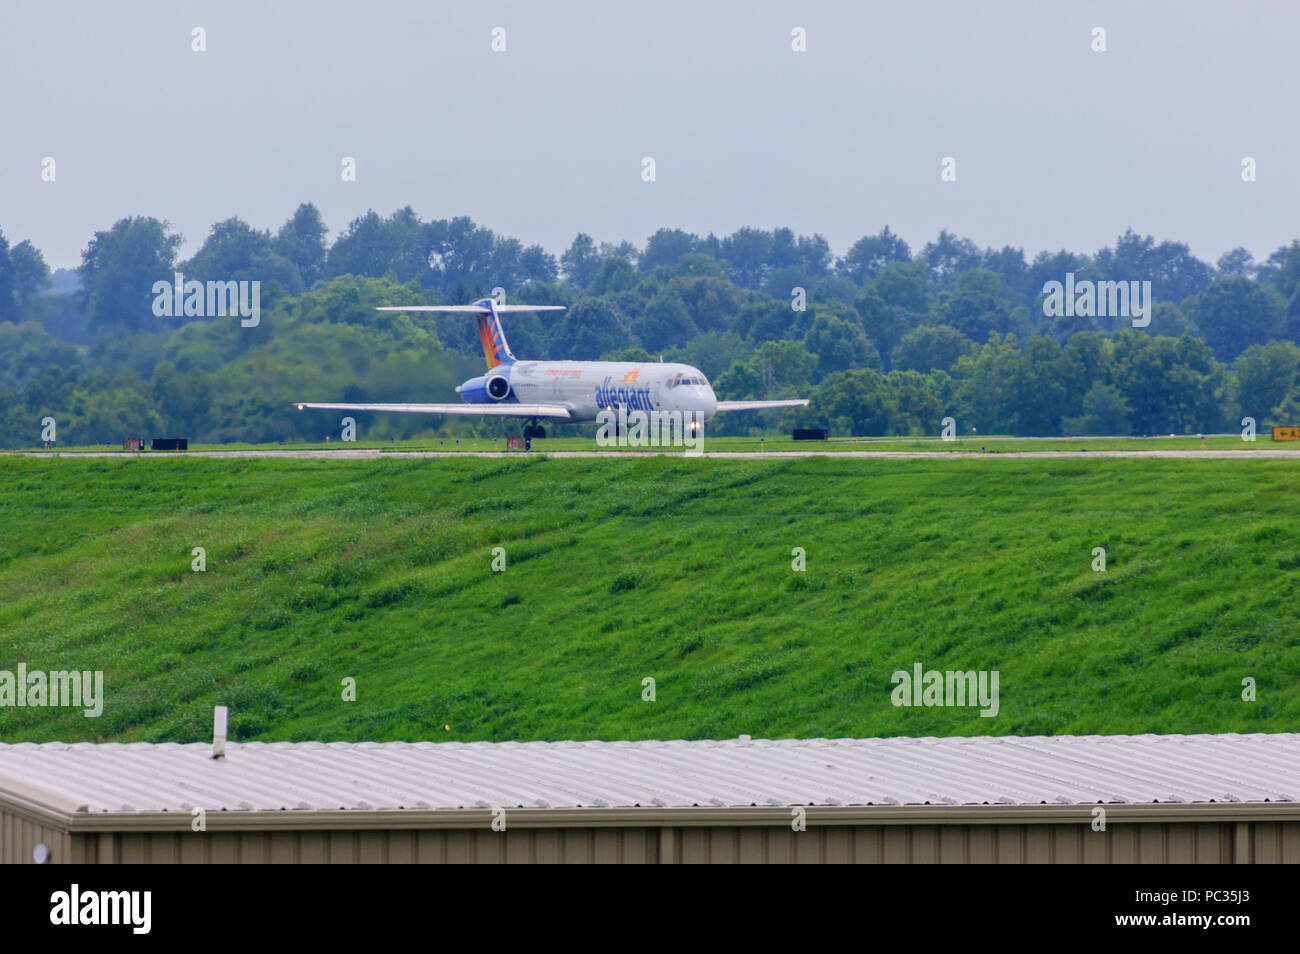 Allegiant Airlines taxiing and taking off from Lexington Bluegrass Airport Stock Photo